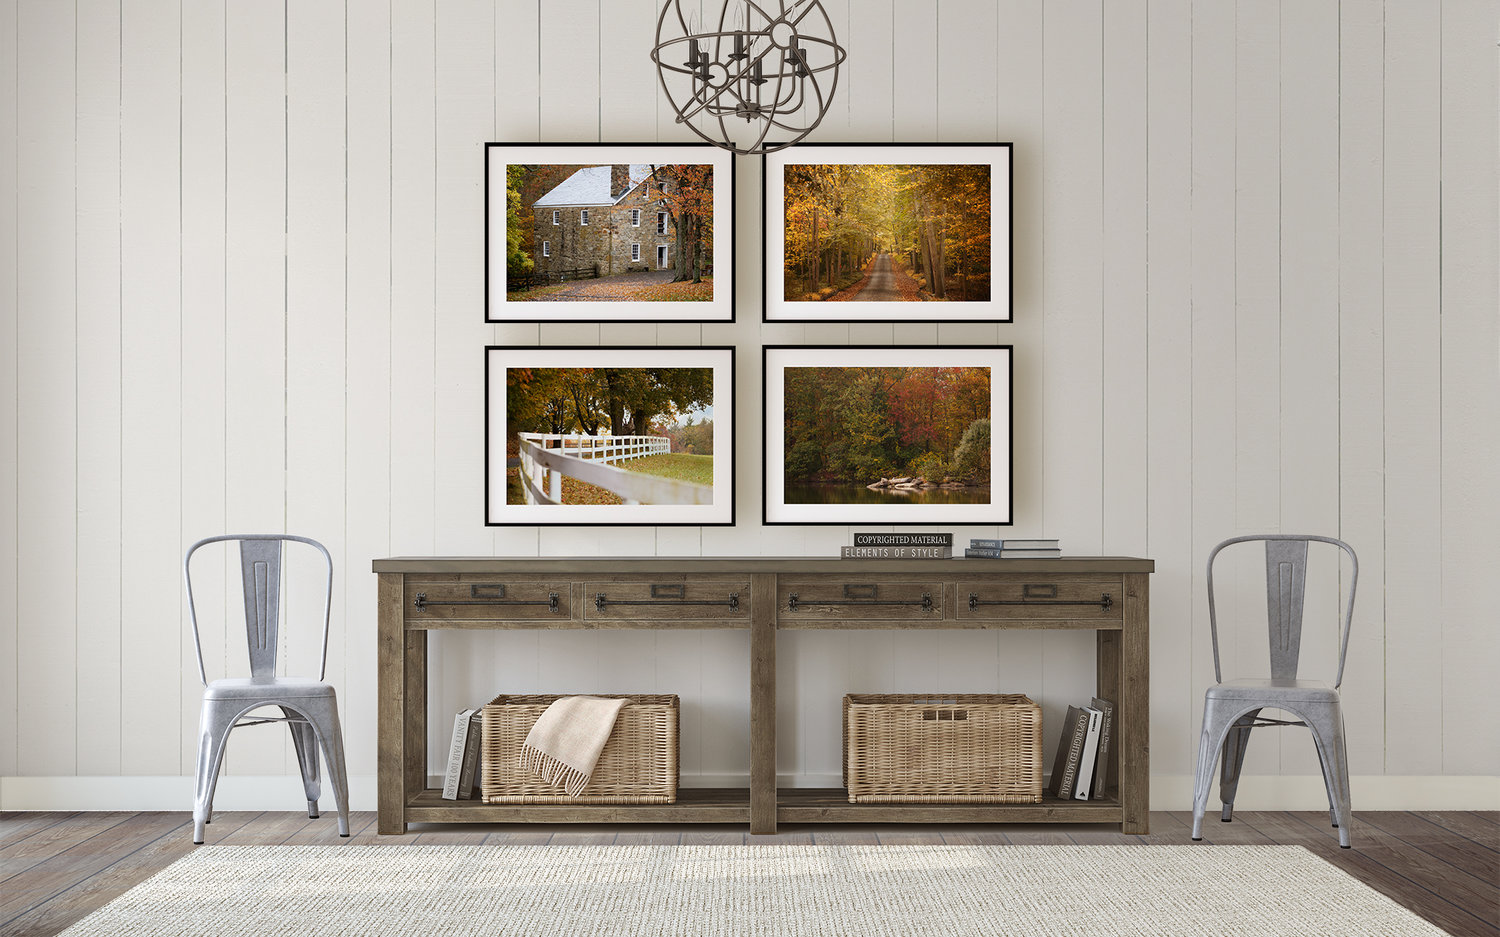 11x14 Photography Prints 4 5x7 Prints Only 8x10 or 16x20. 5x7 Rustic Red Farmhouse Home Decor Set of 4 Country Barn Landscape Picture Gallery Not Framed